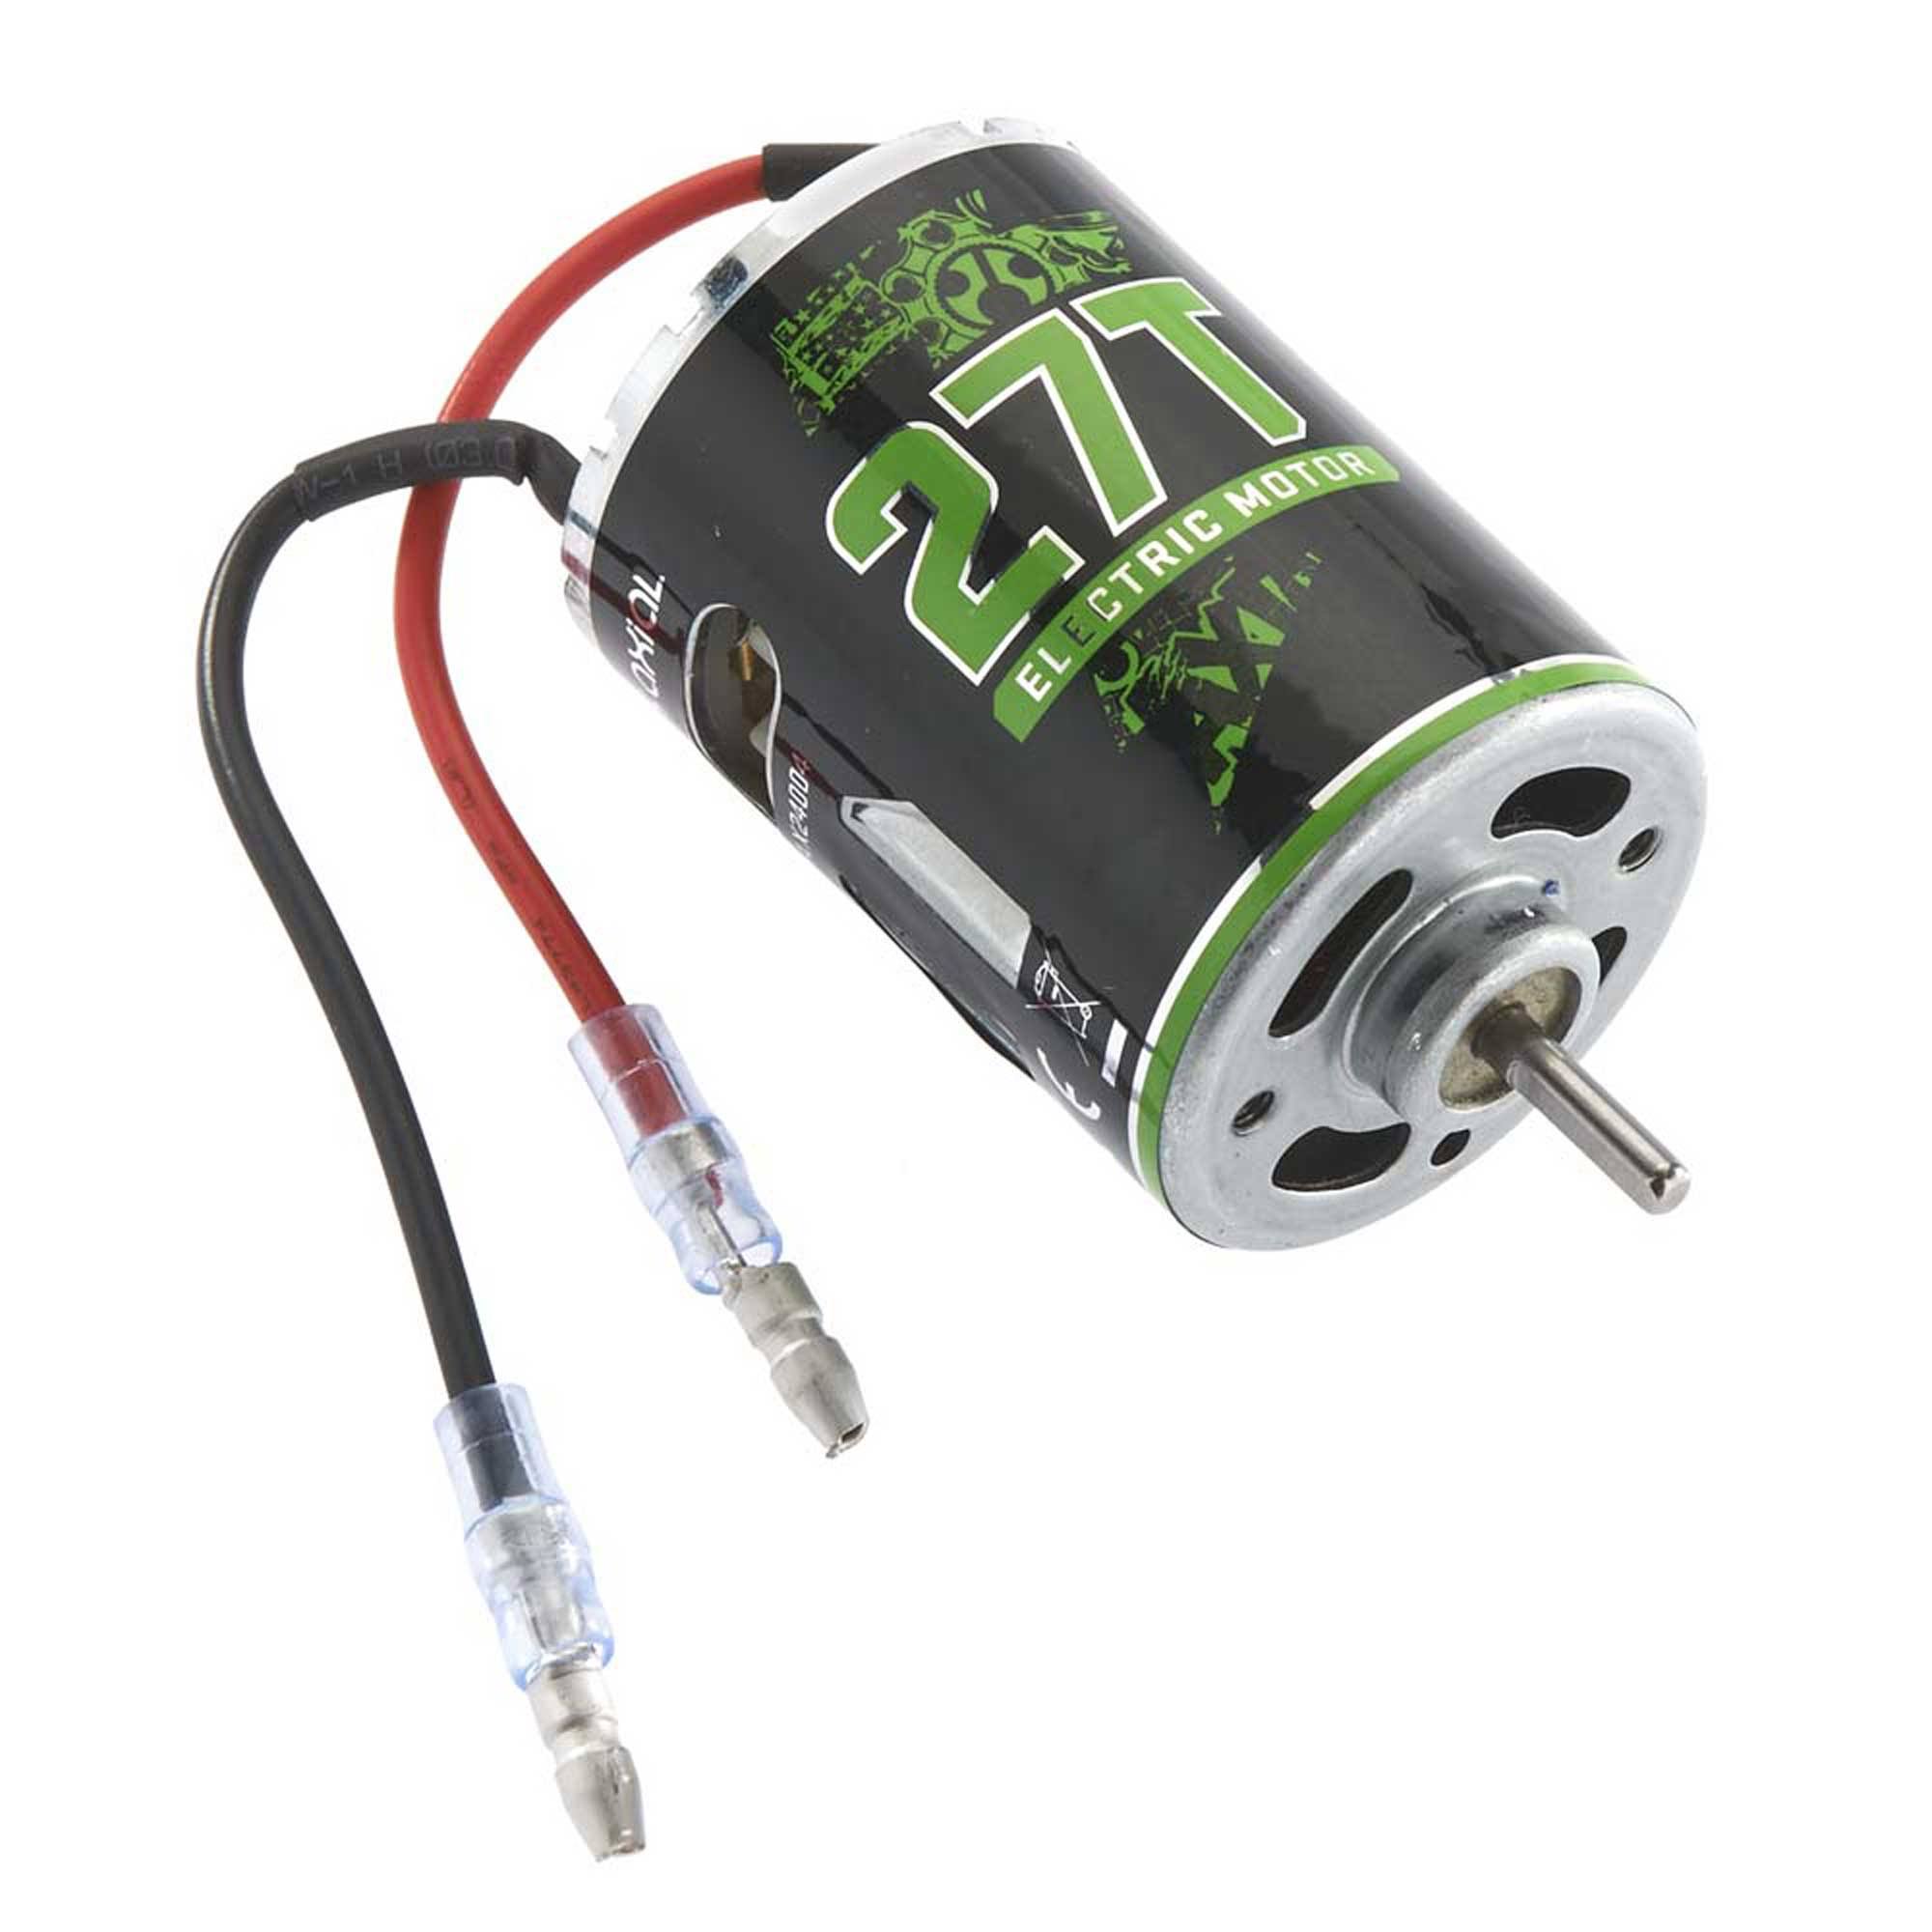 Axial Am27 27T 540 Electric Motor